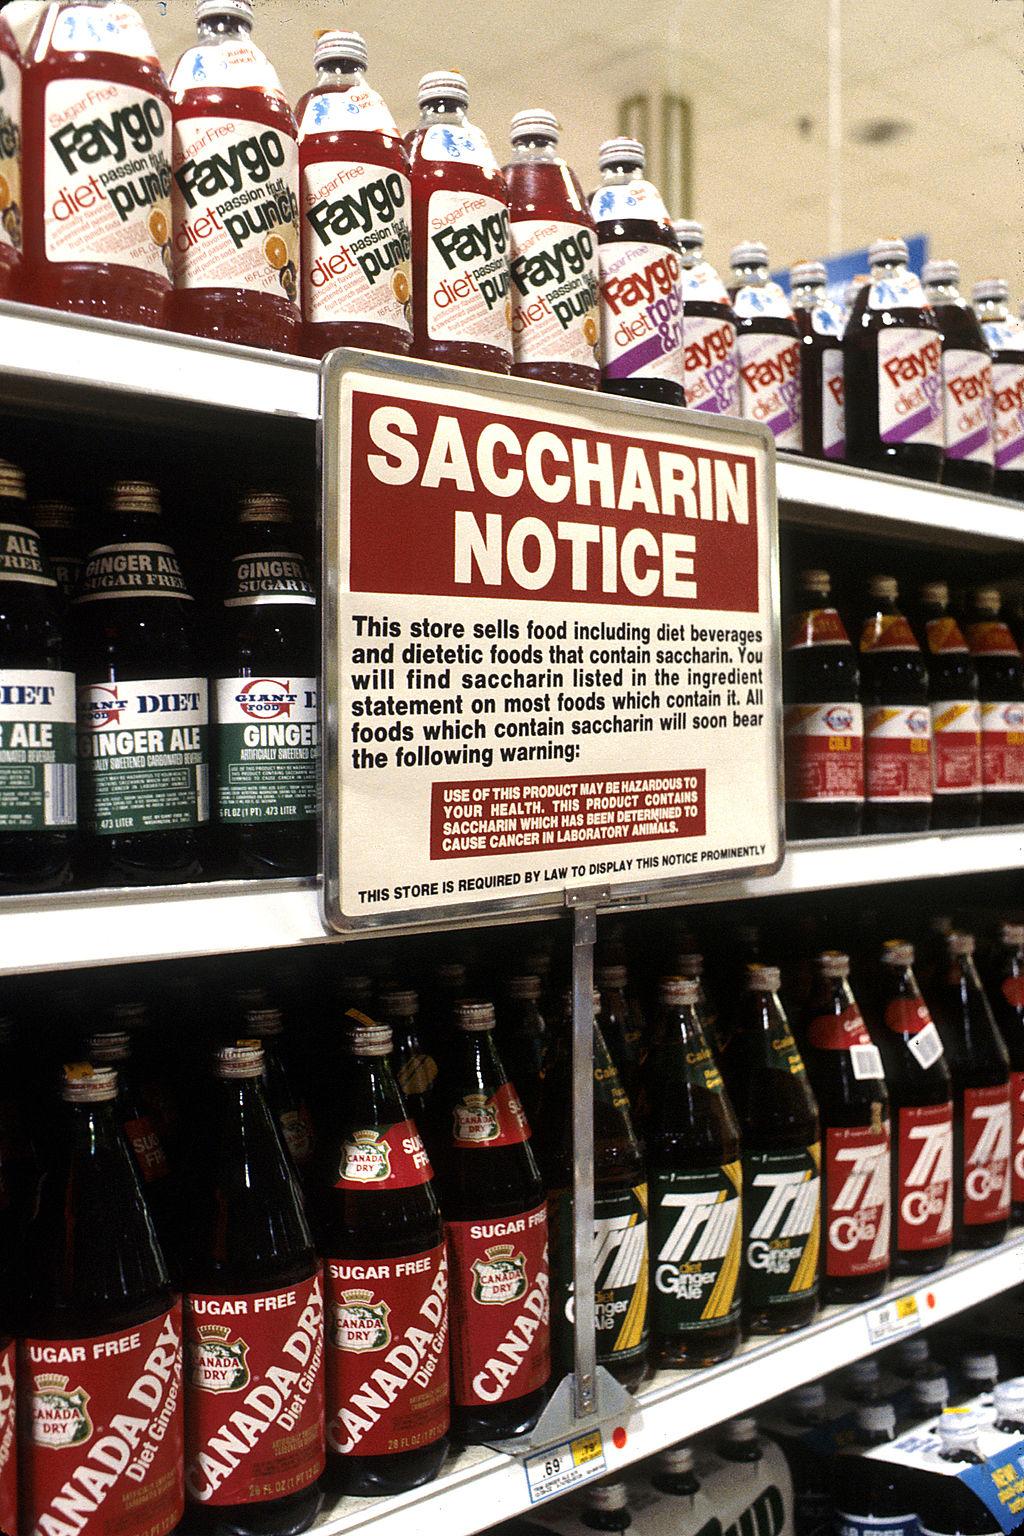 A photo shows a large sign titled "Saccharin Notice" posted in front of a shelf full of soda. Photo appears to be from the 1980's. The sign reads: "This store sells food including diet beverages and dietetic foods that contain saccharin. You will find saccharin listed in the ingredient statement on most food which contain it. All foods which contain saccharin will soon bear the following warning: Use the this product may be hazardous to your health. This product contains saccharin which has been determined to cause cancer in lab animals."